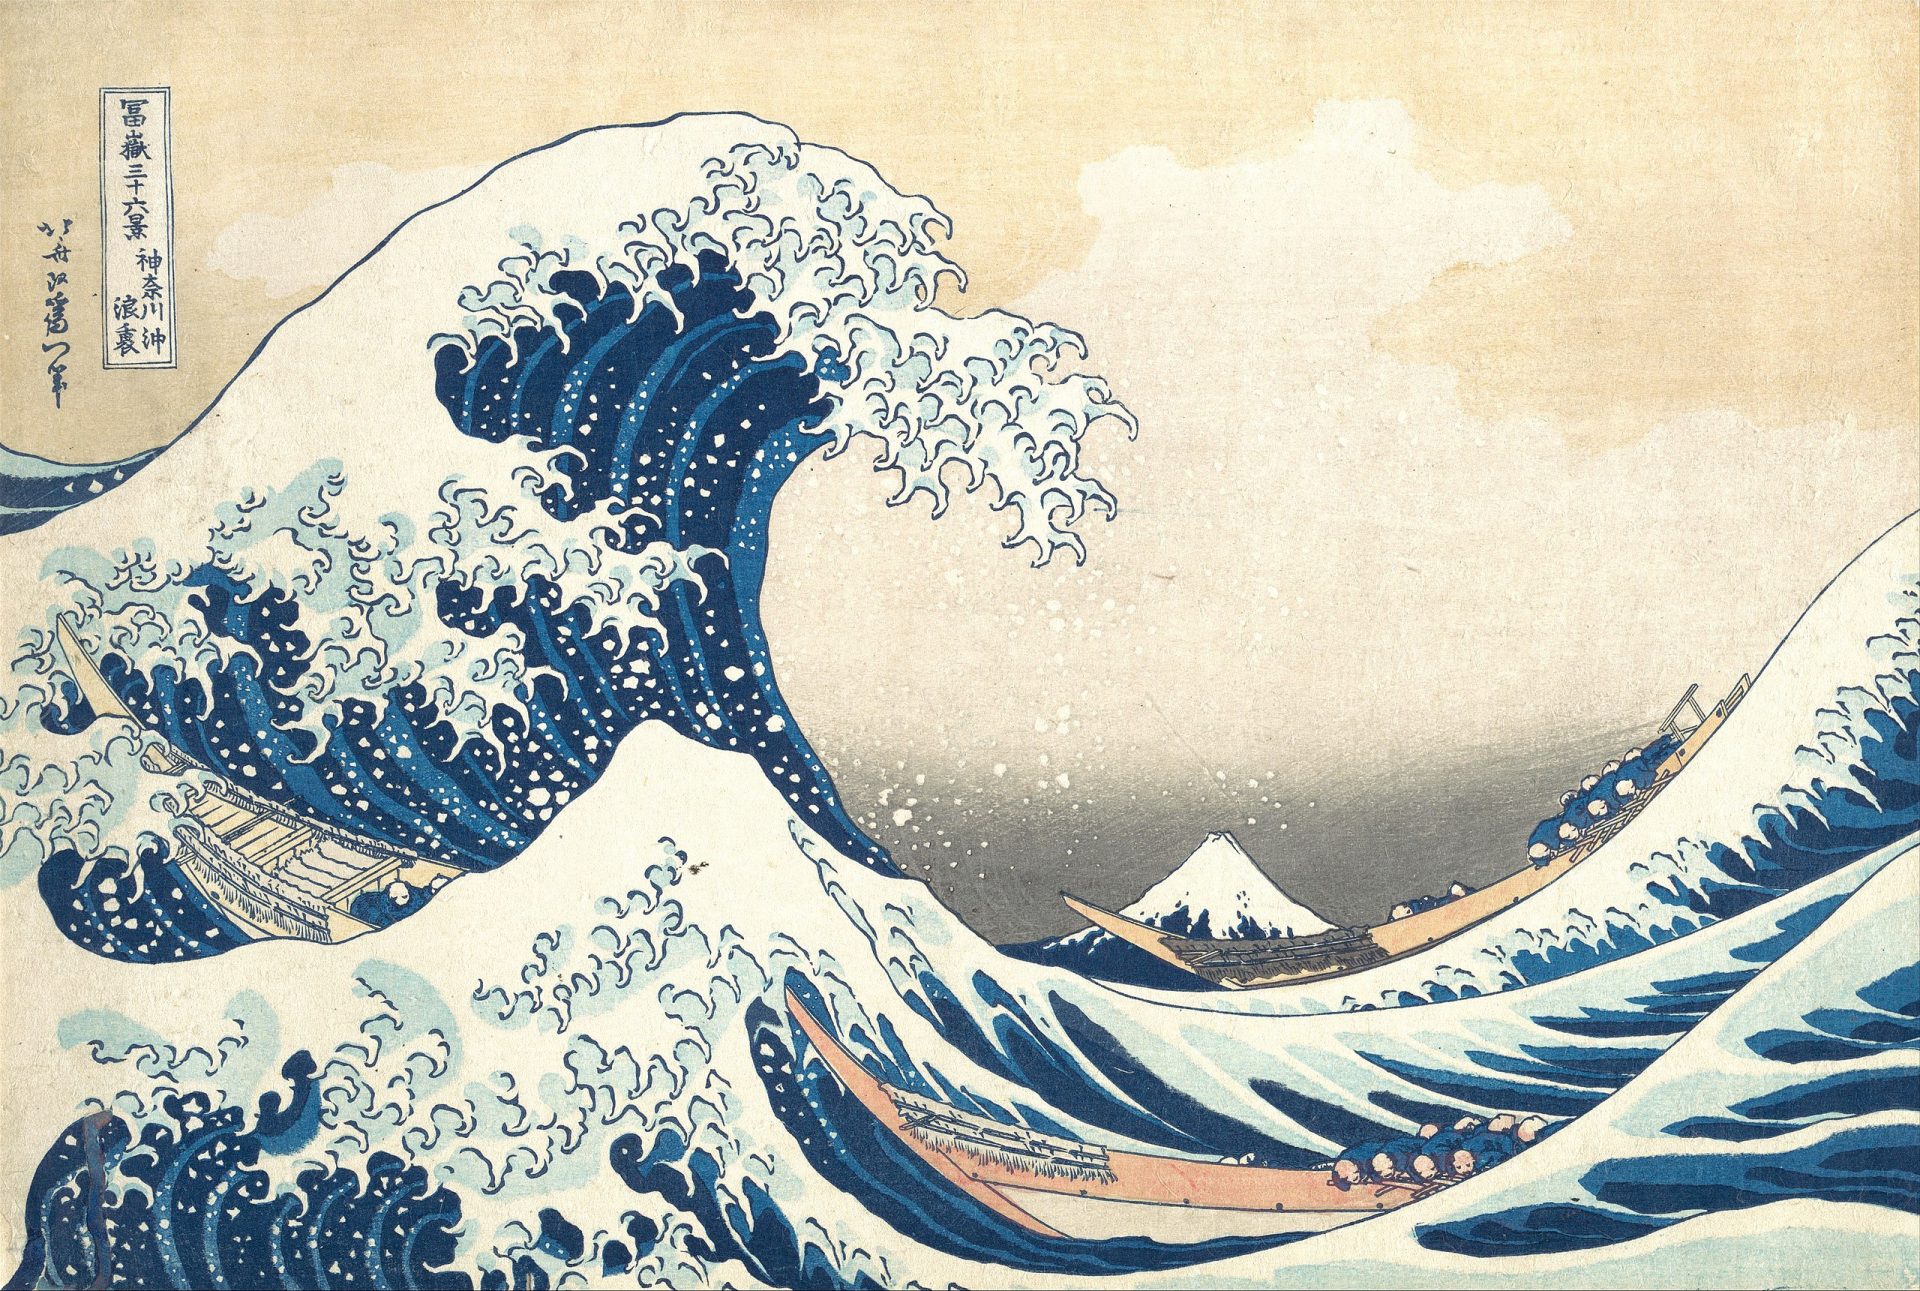 A Japanese style print, featuring a large blue wave coming down on boats. Mount Fuji is in the background.